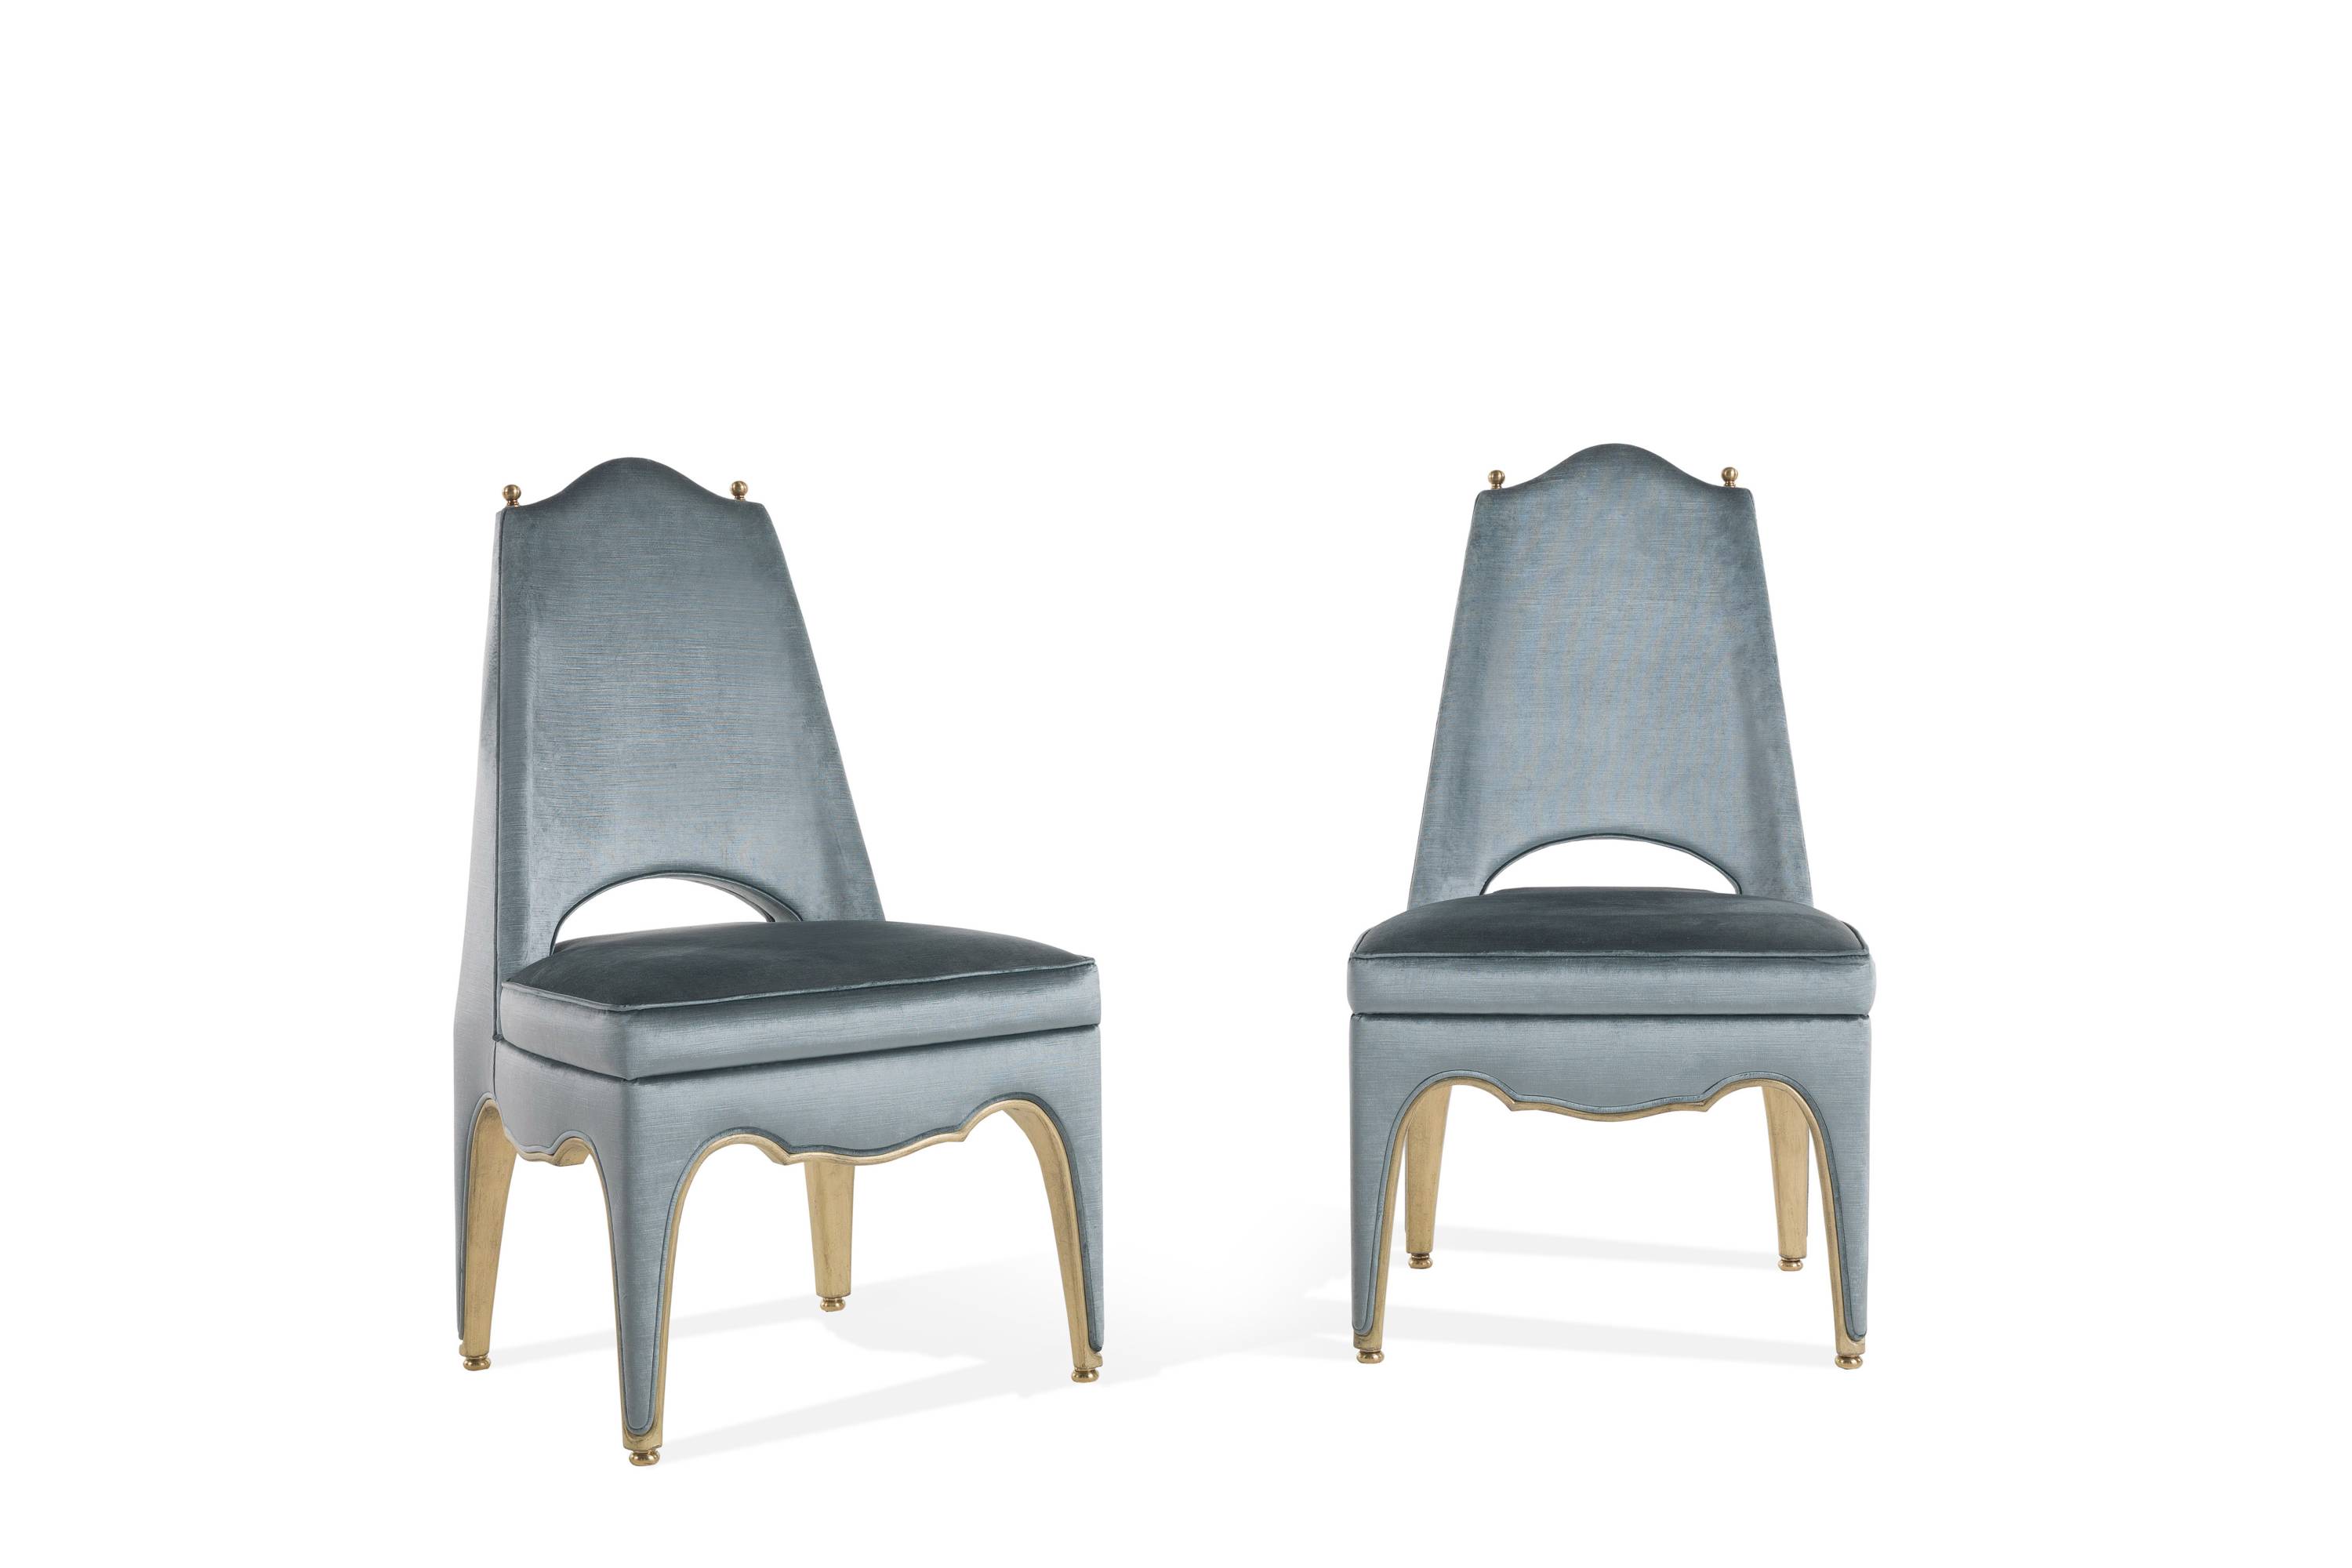 ETOILE chair - chair with armrests – Transform your space with luxury Made in Italy classic chairs of Savoir-Faire collection.